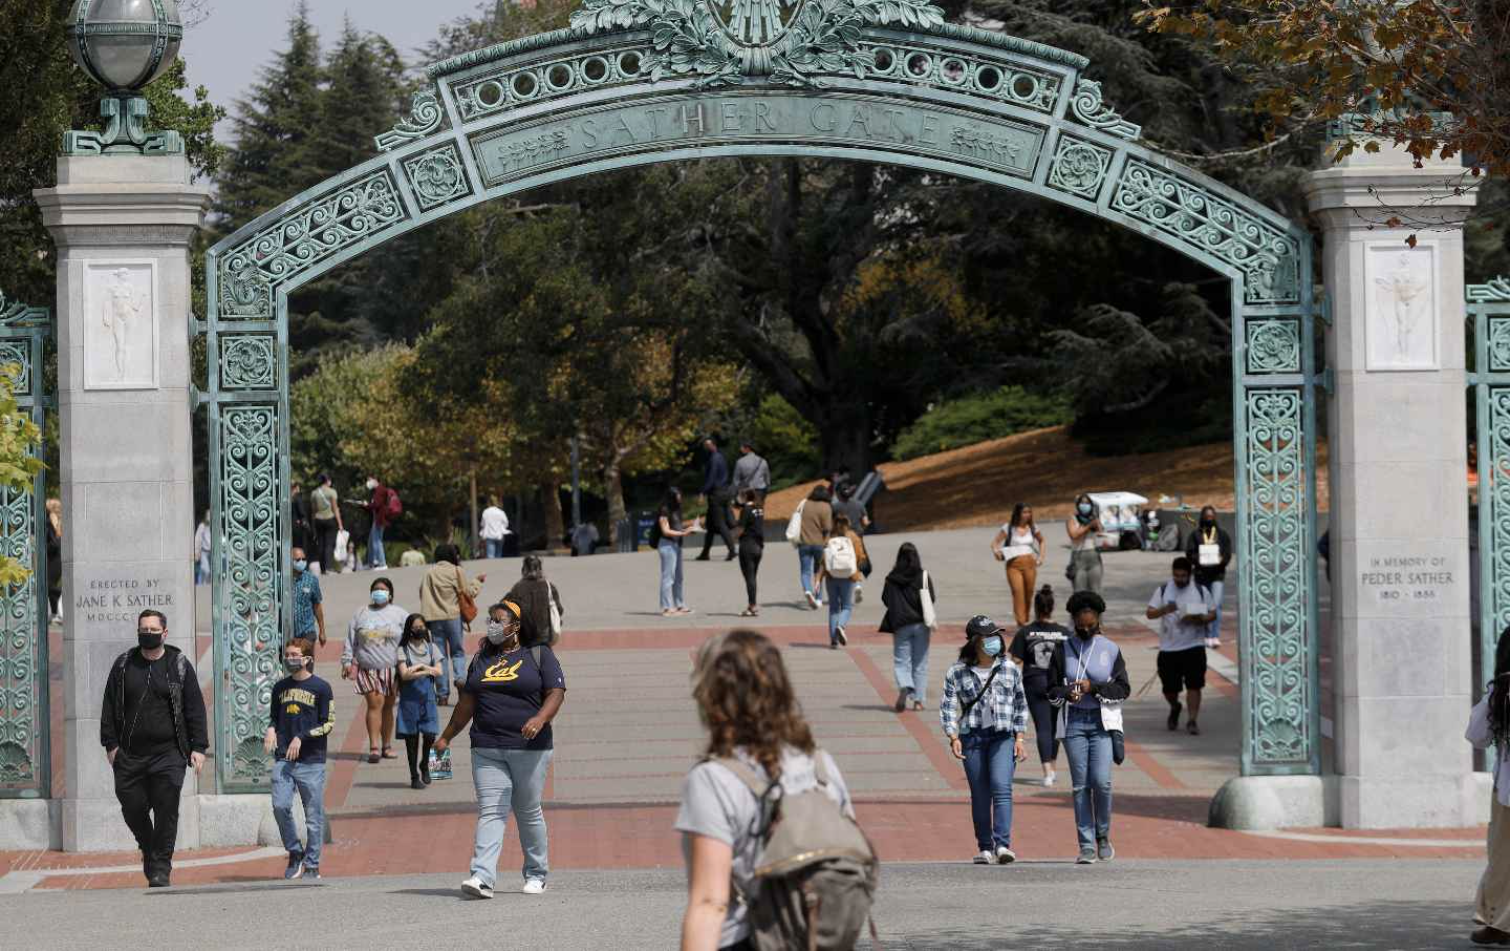 How Can Universities Fix Title IX? By Listening to Survivors.